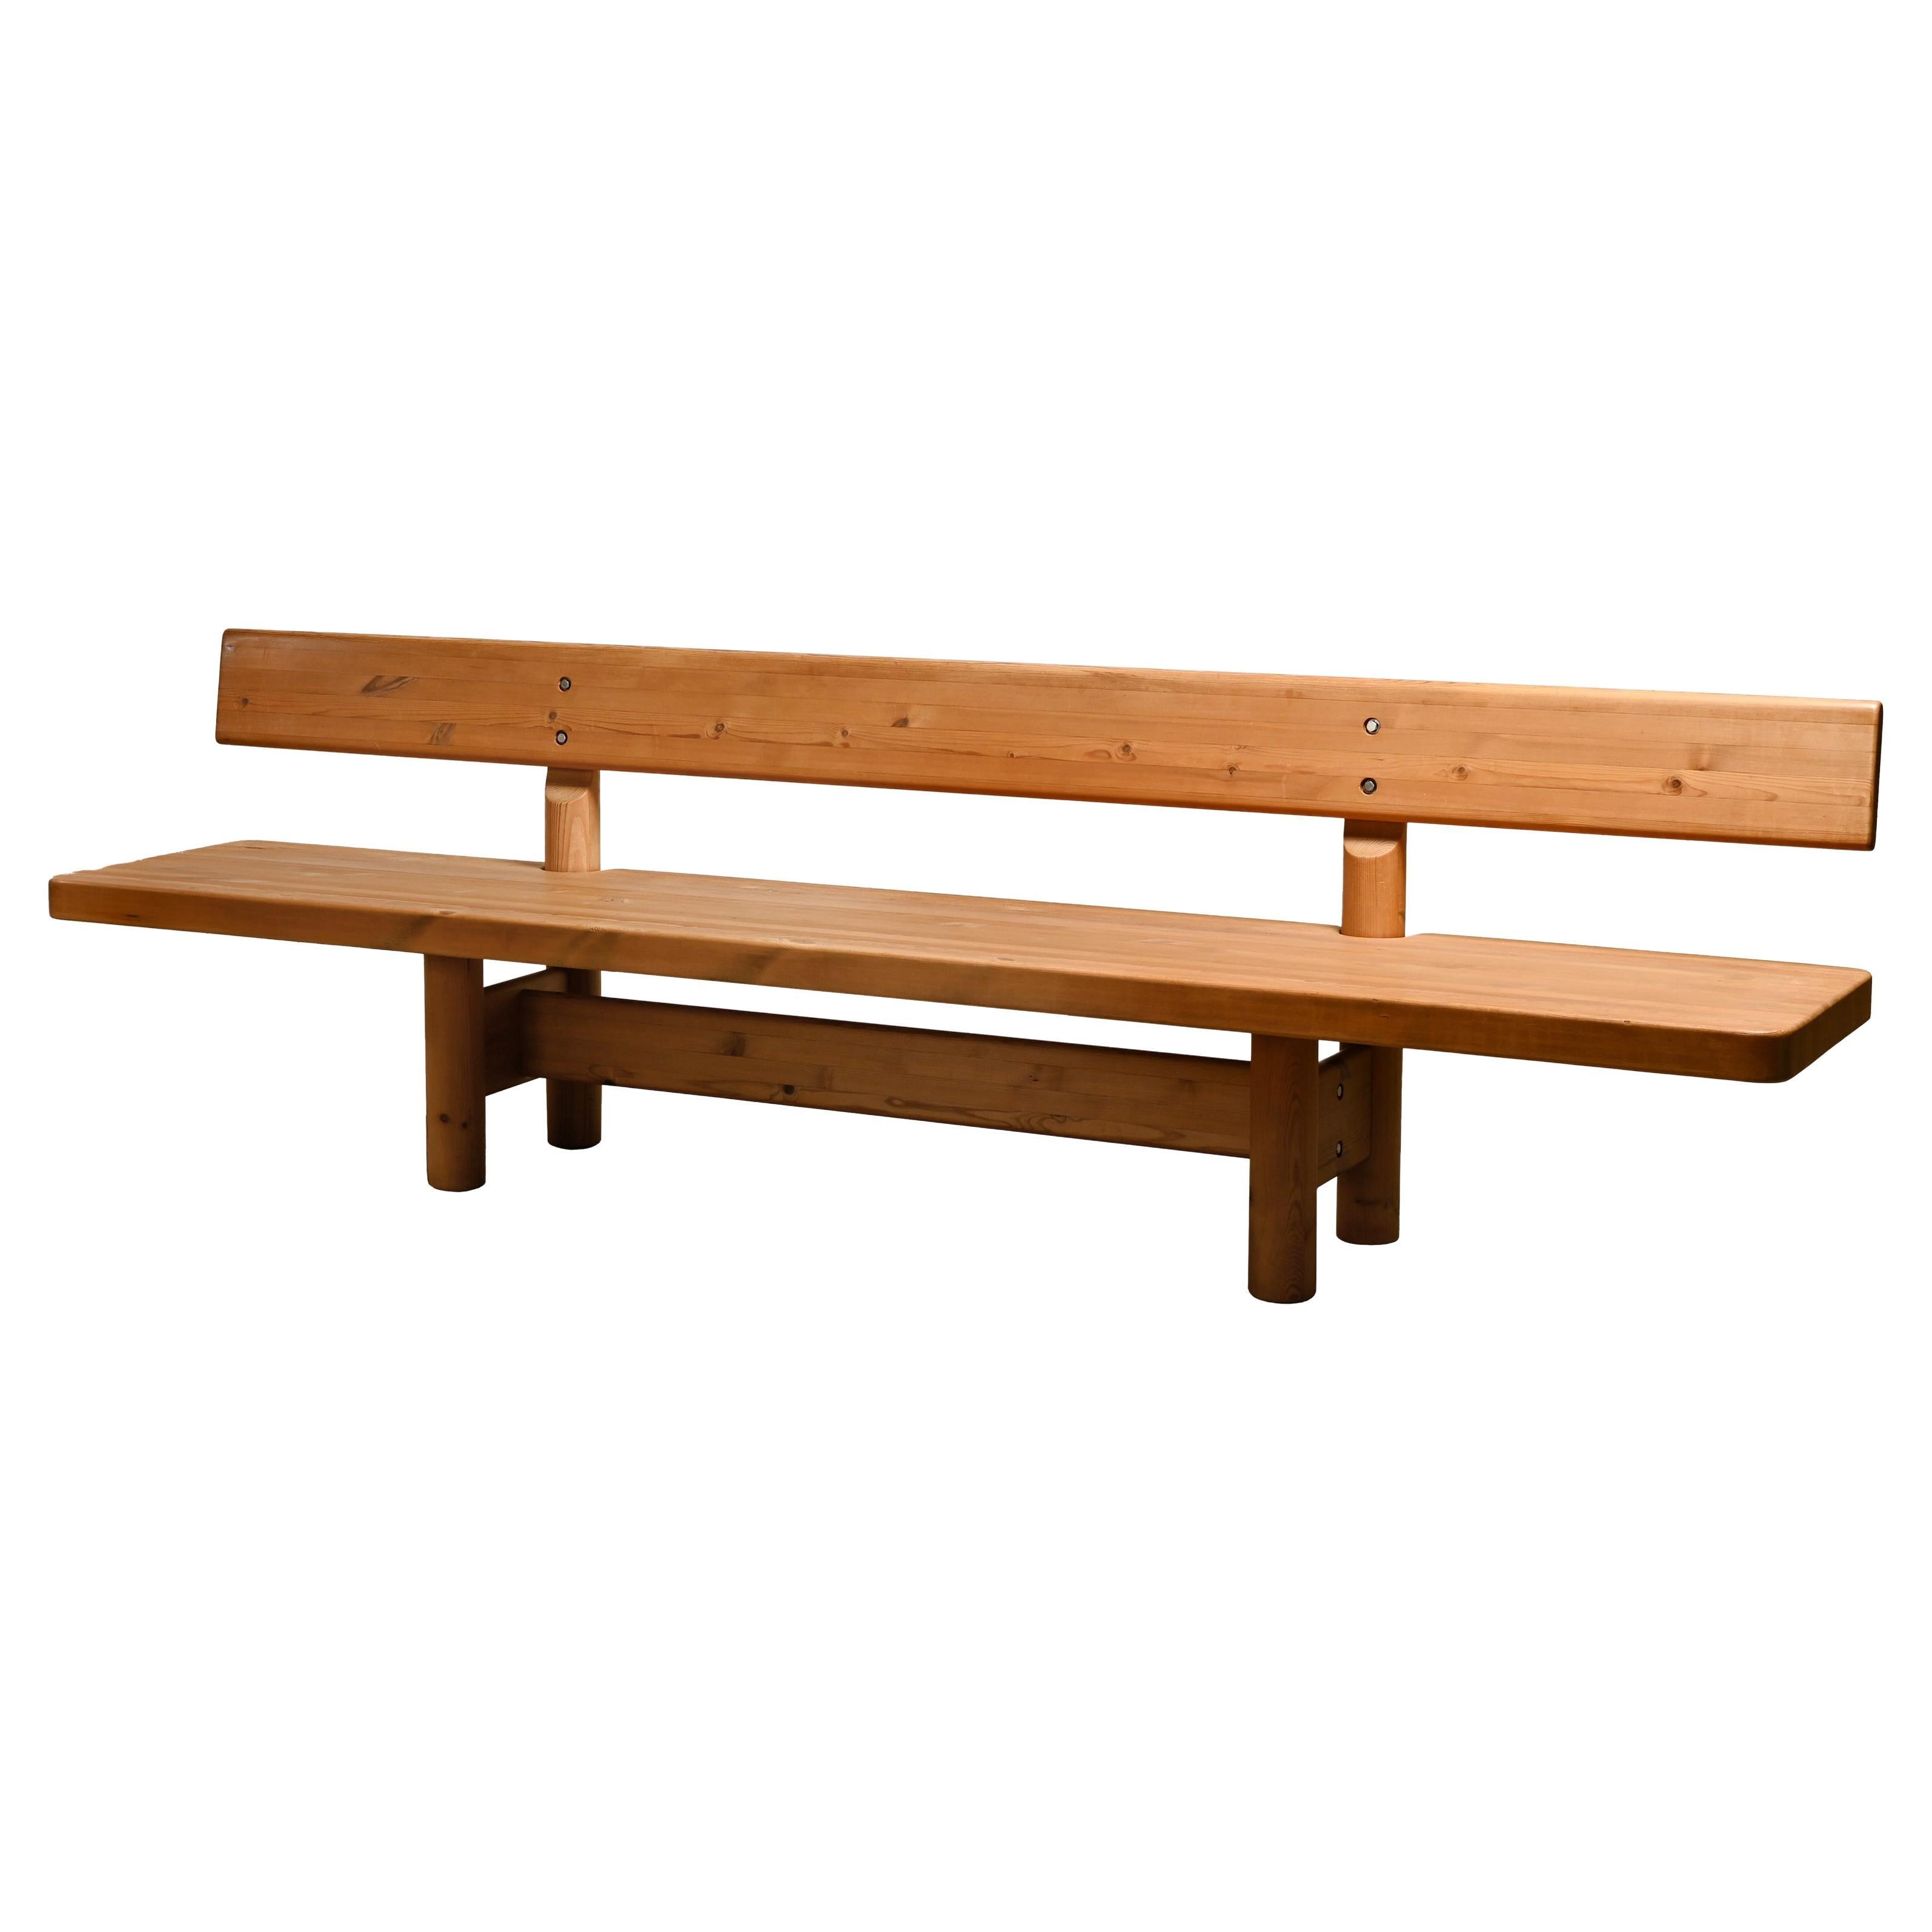 Large Bench in Solid 1stDibs Friis Pine and Moltke Architects Danish at Nielsen, by 1978 Sale For Wood